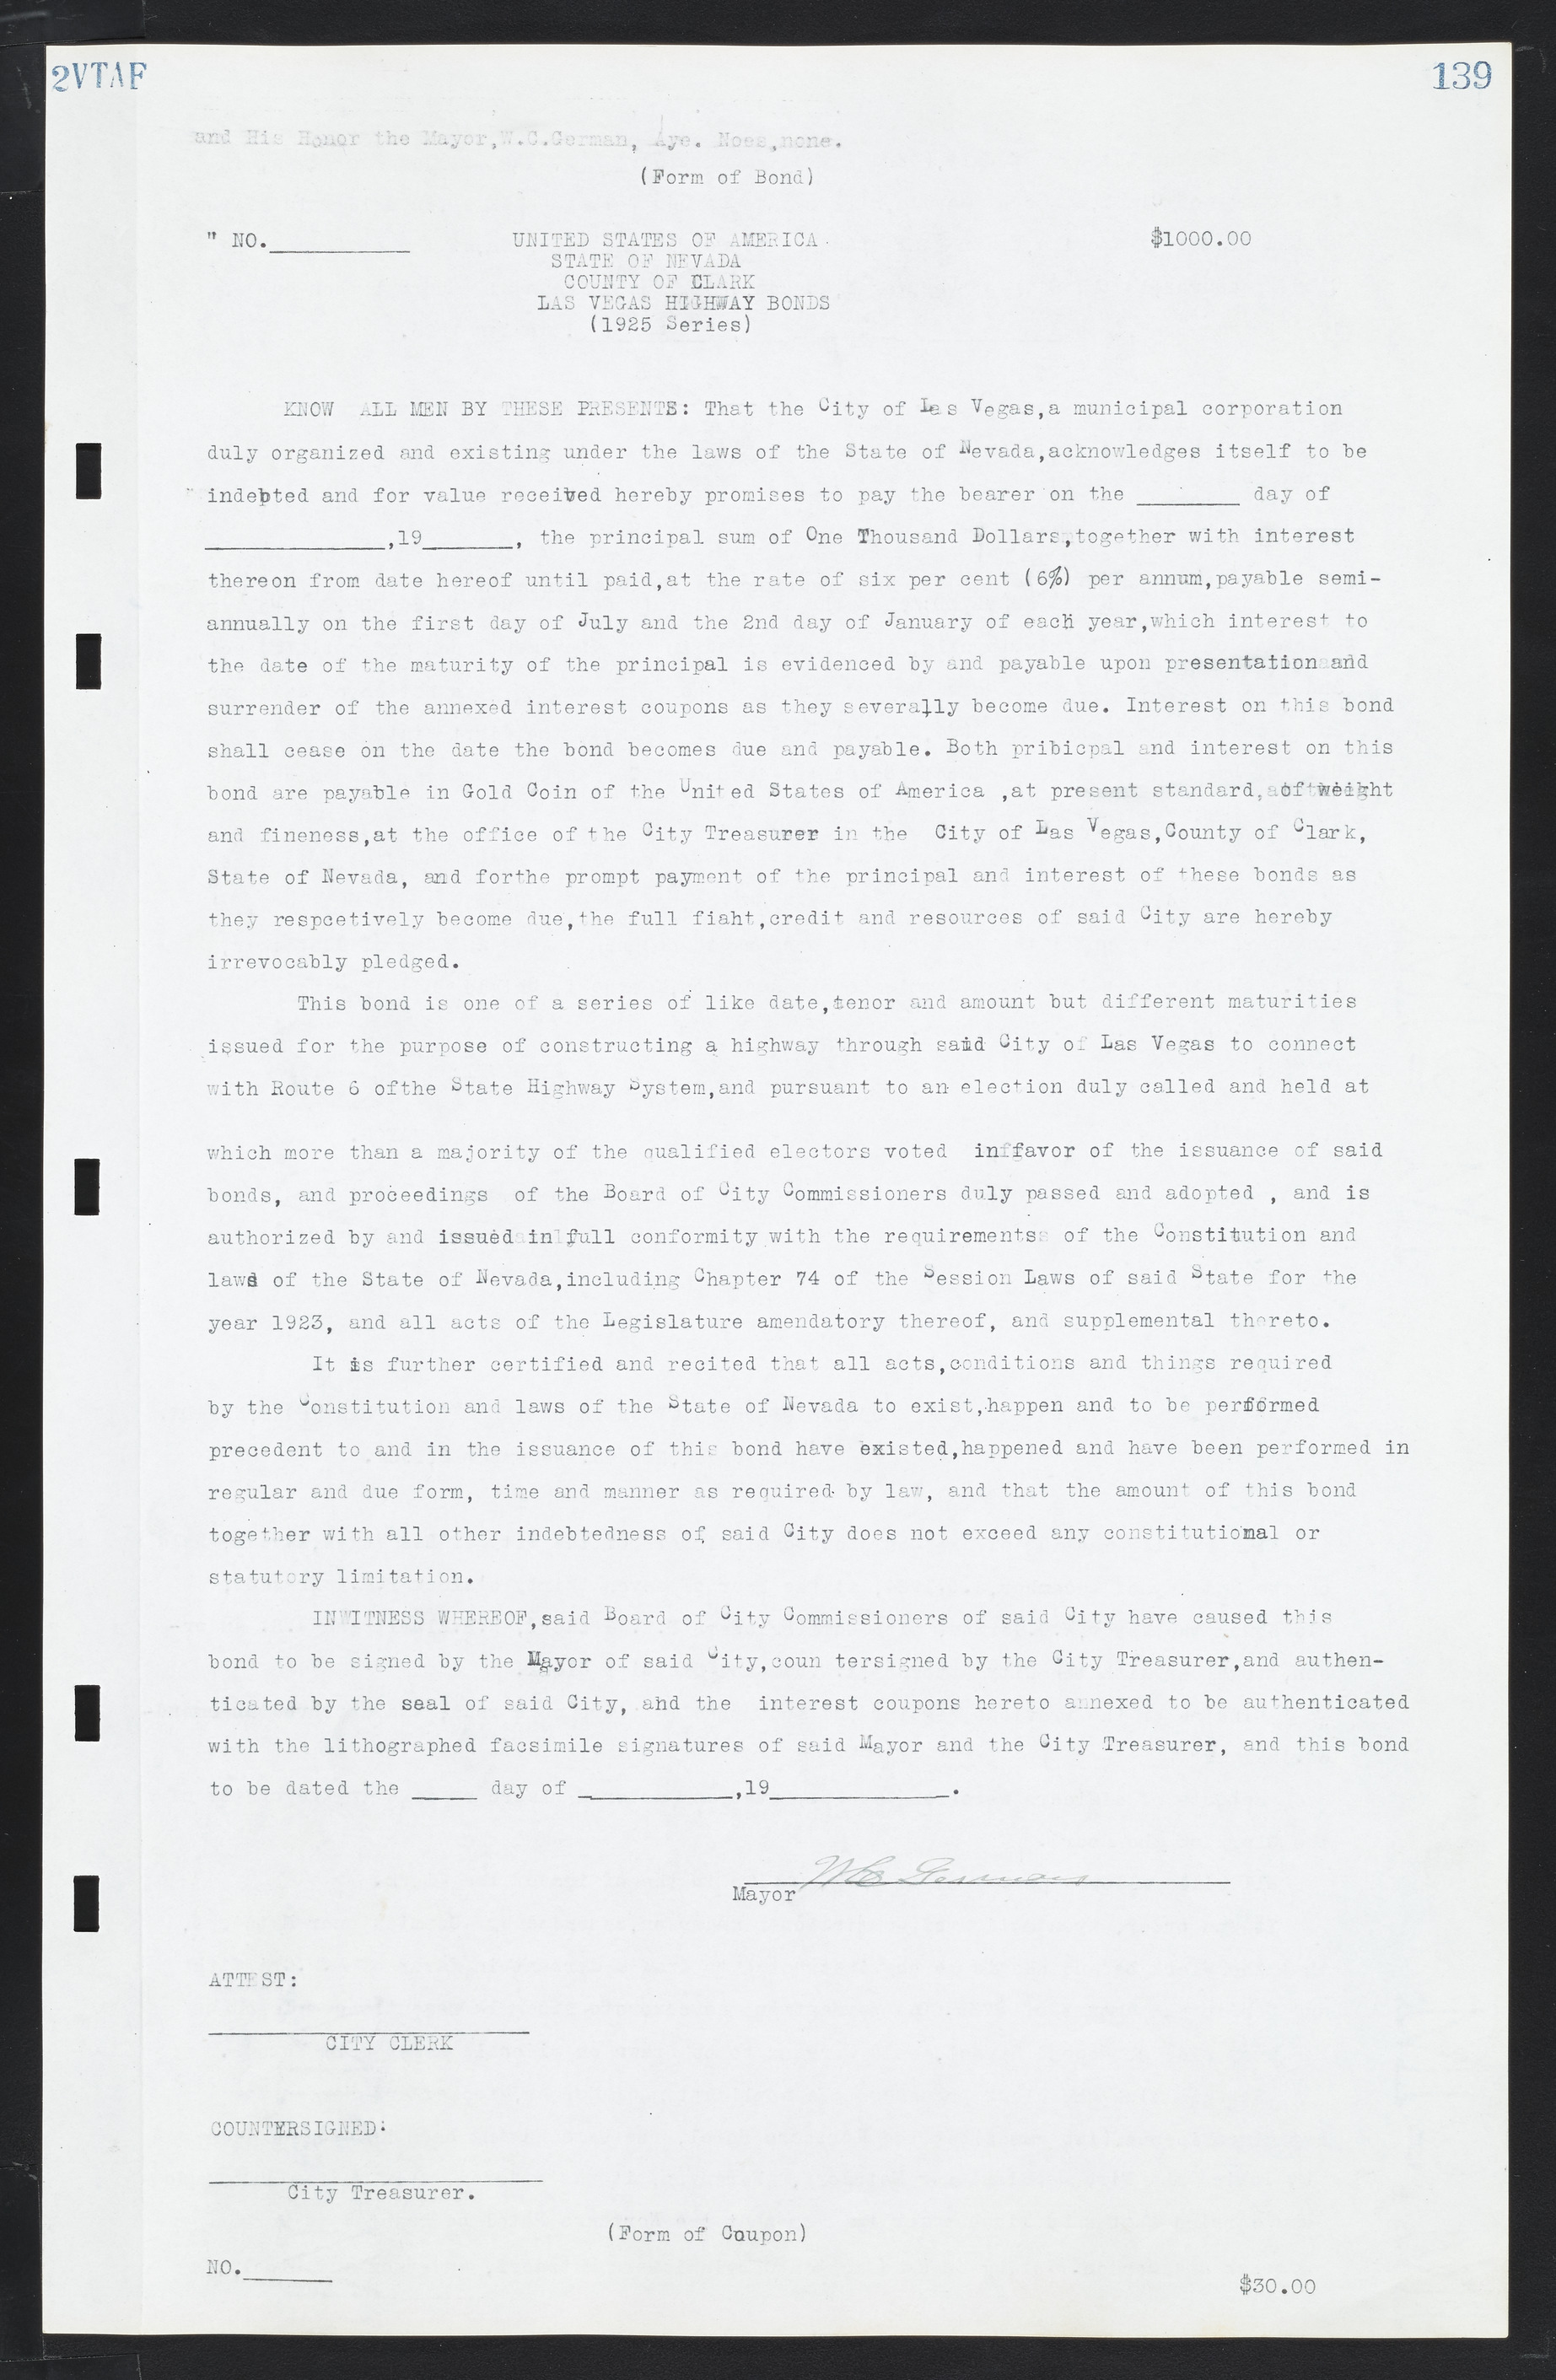 Las Vegas City Commission Minutes, March 1, 1922 to May 10, 1929, lvc000002-146